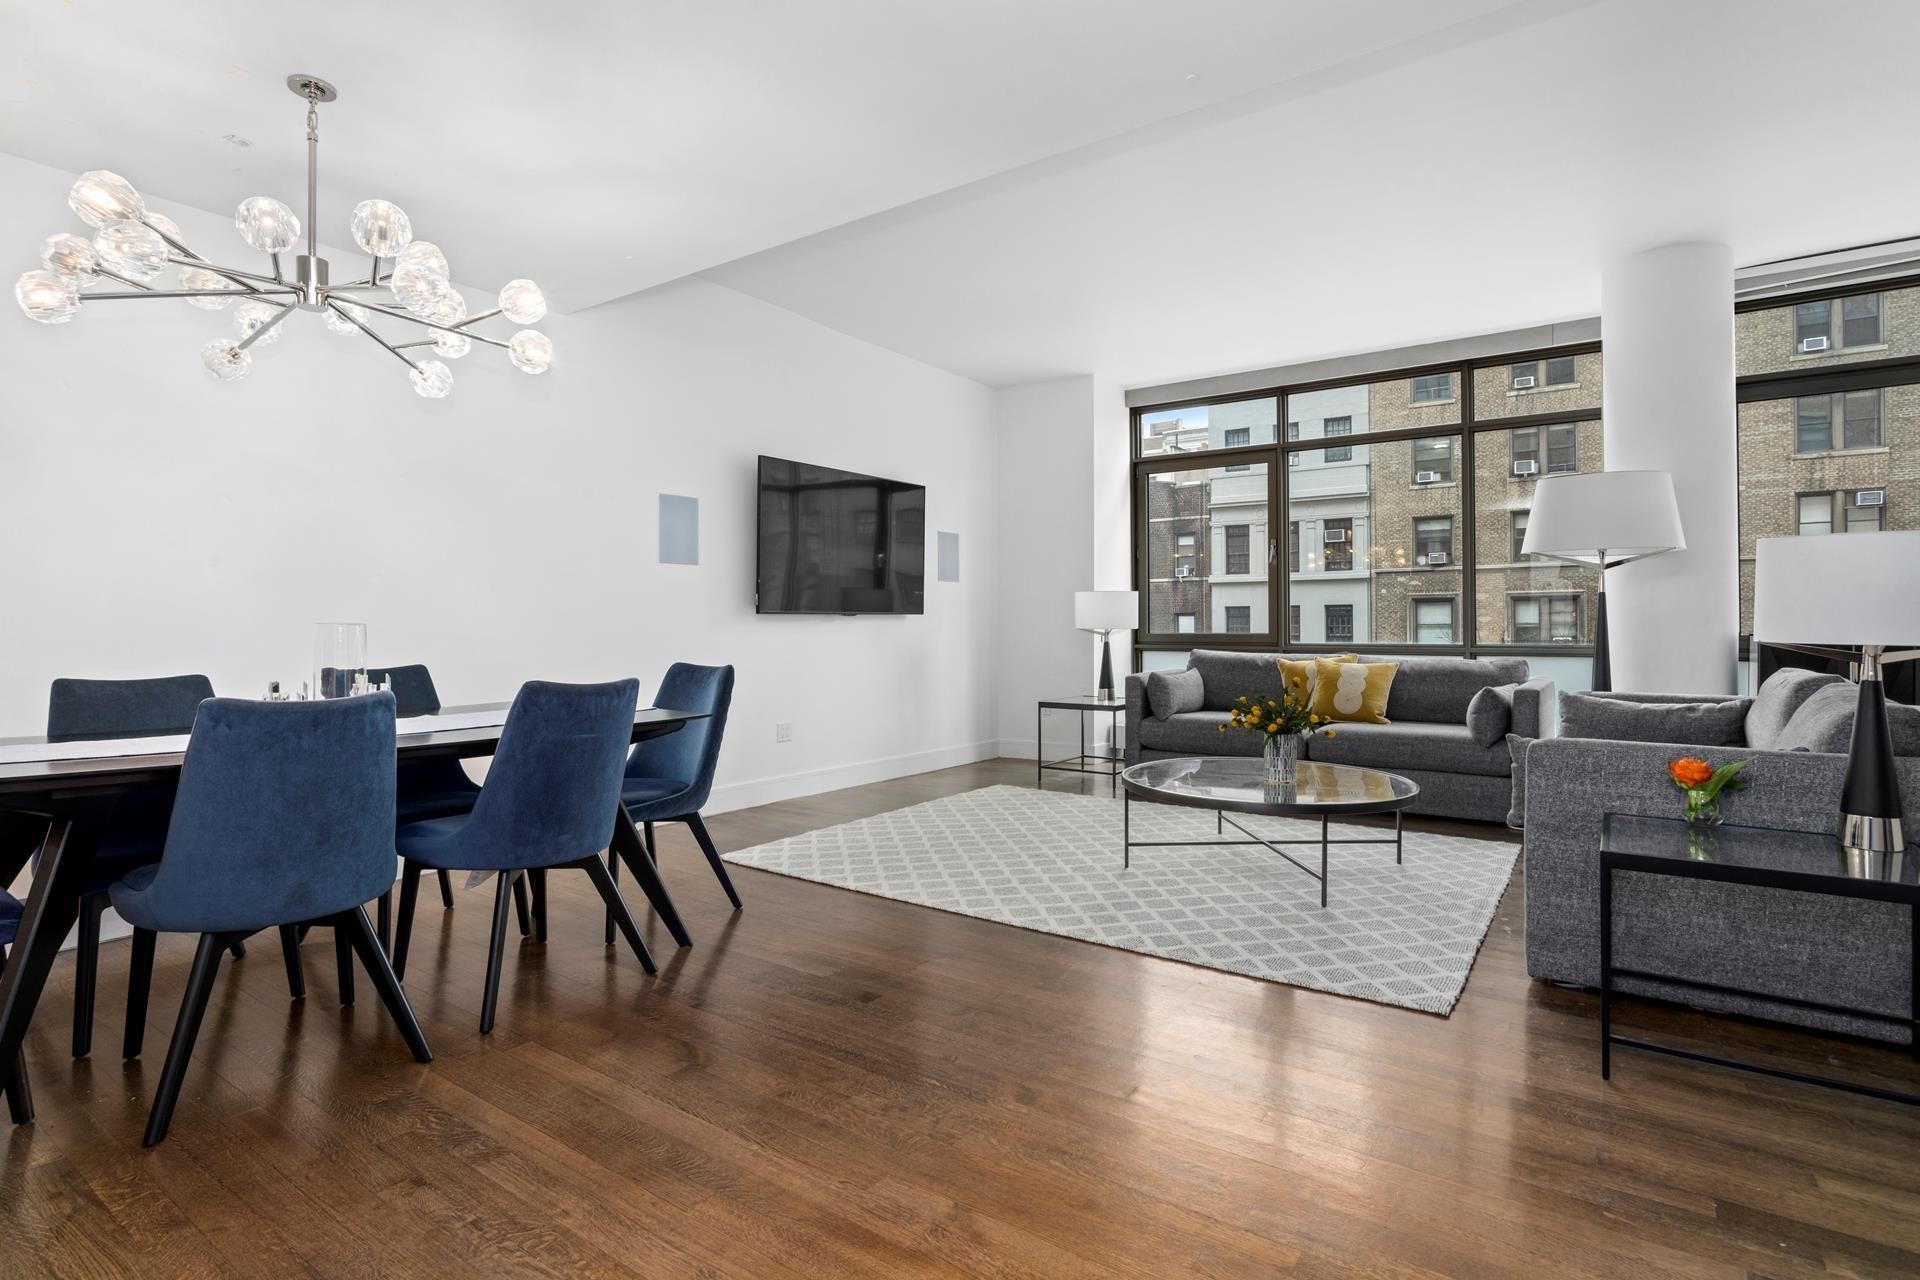 Condominium for Sale at Harsen House, 120 W 72ND ST, 4B Lincoln Square, New York, New York 10023